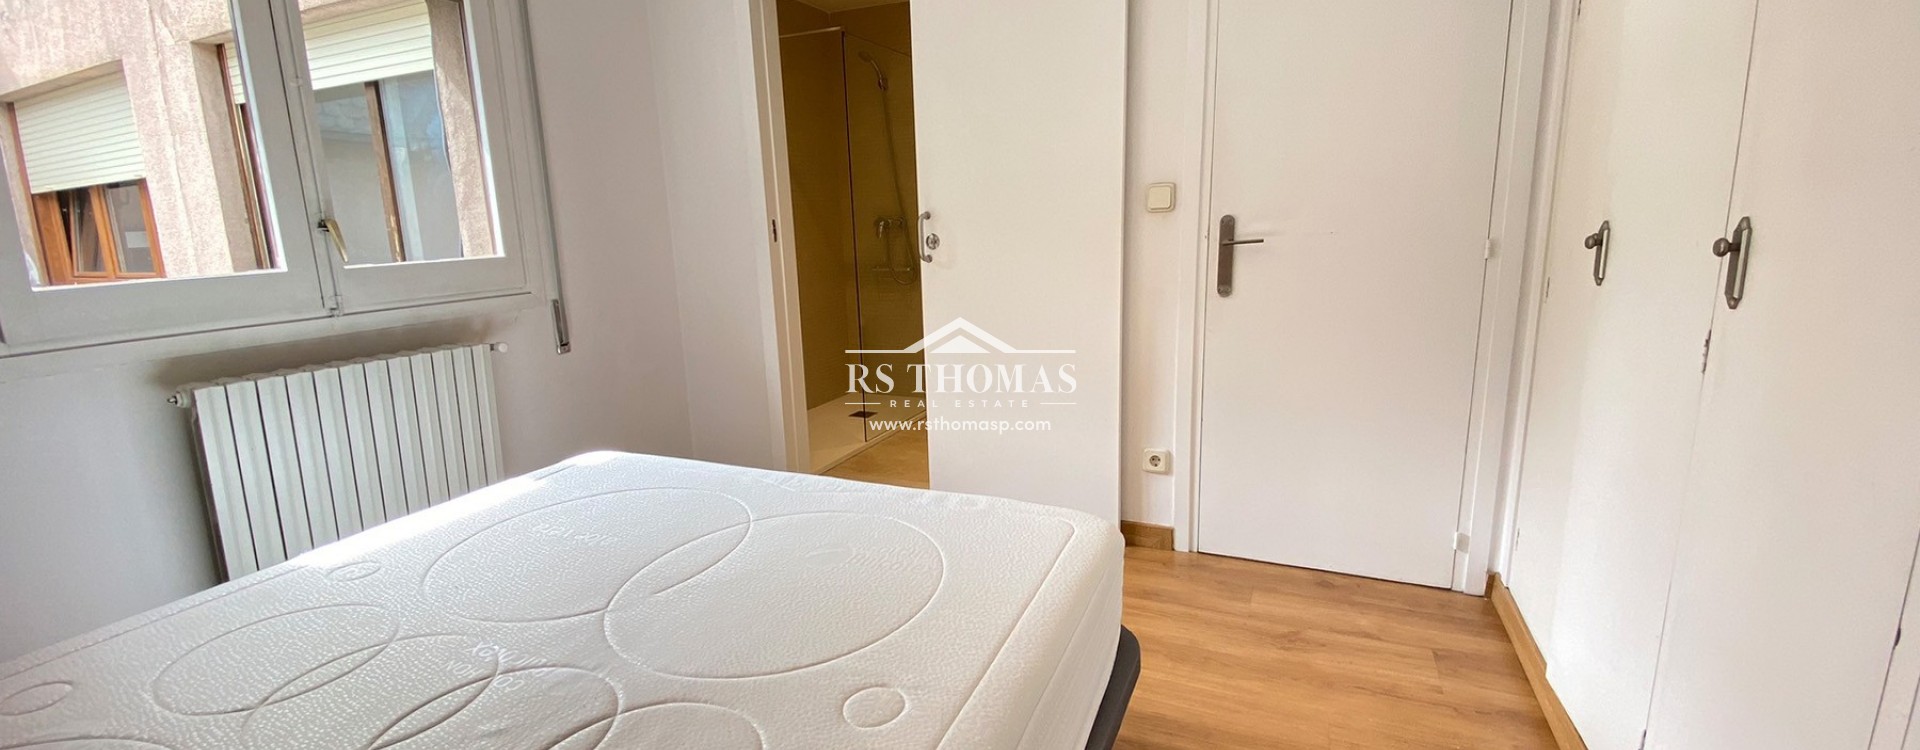 Penthouse for rent in Andorra la Vella